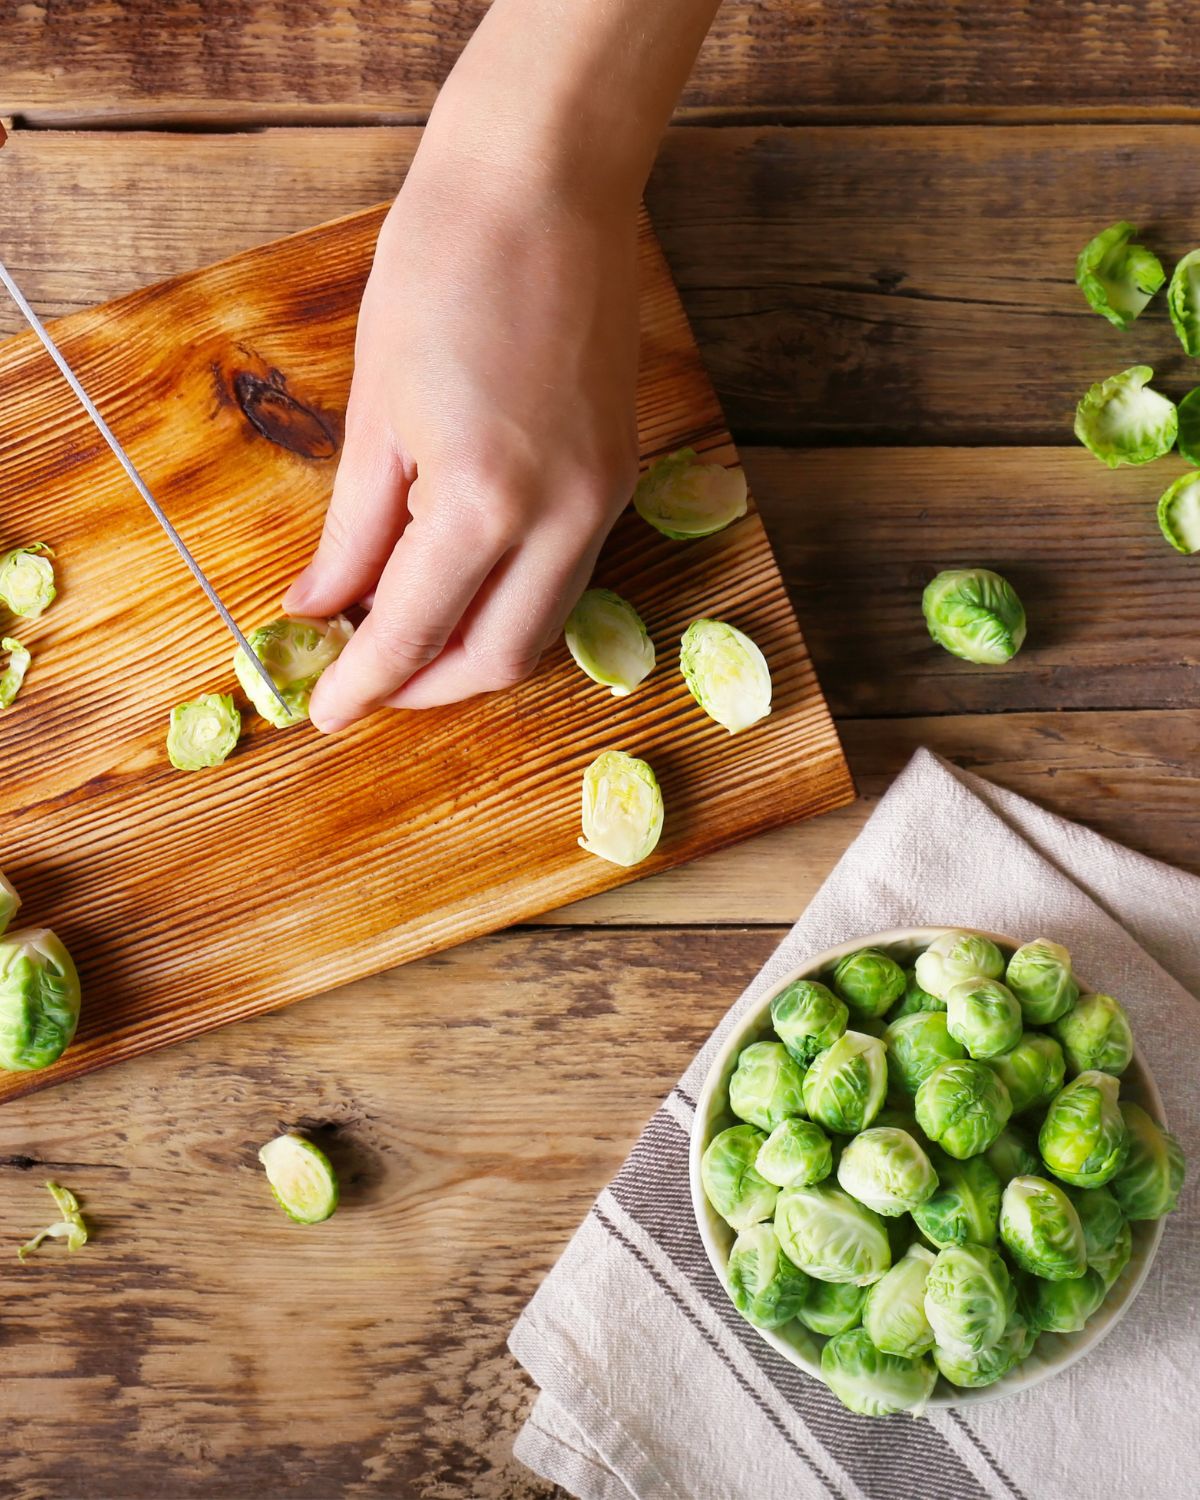 Trimming the brussels sprouts.